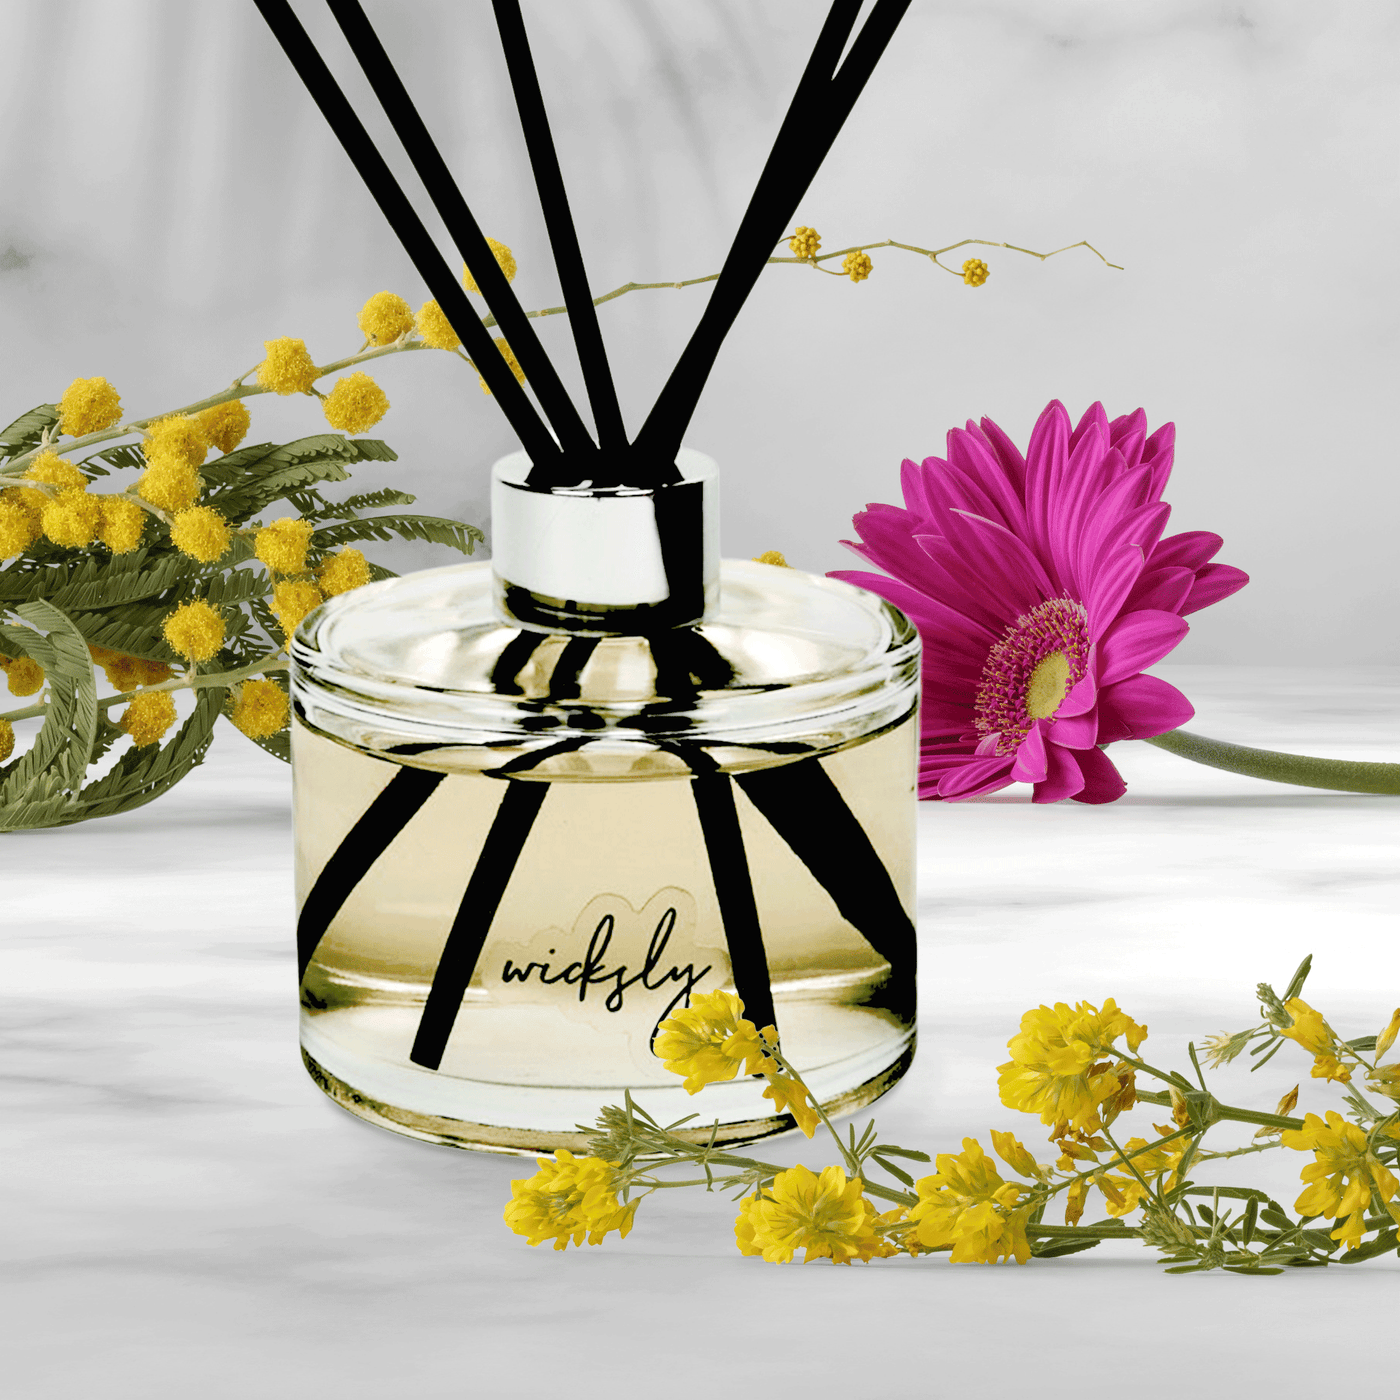 Tomacco Scented round 250 ml Reed Diffuser in clear glass with Wicksly Logo, silver collar, and 5 black reeds